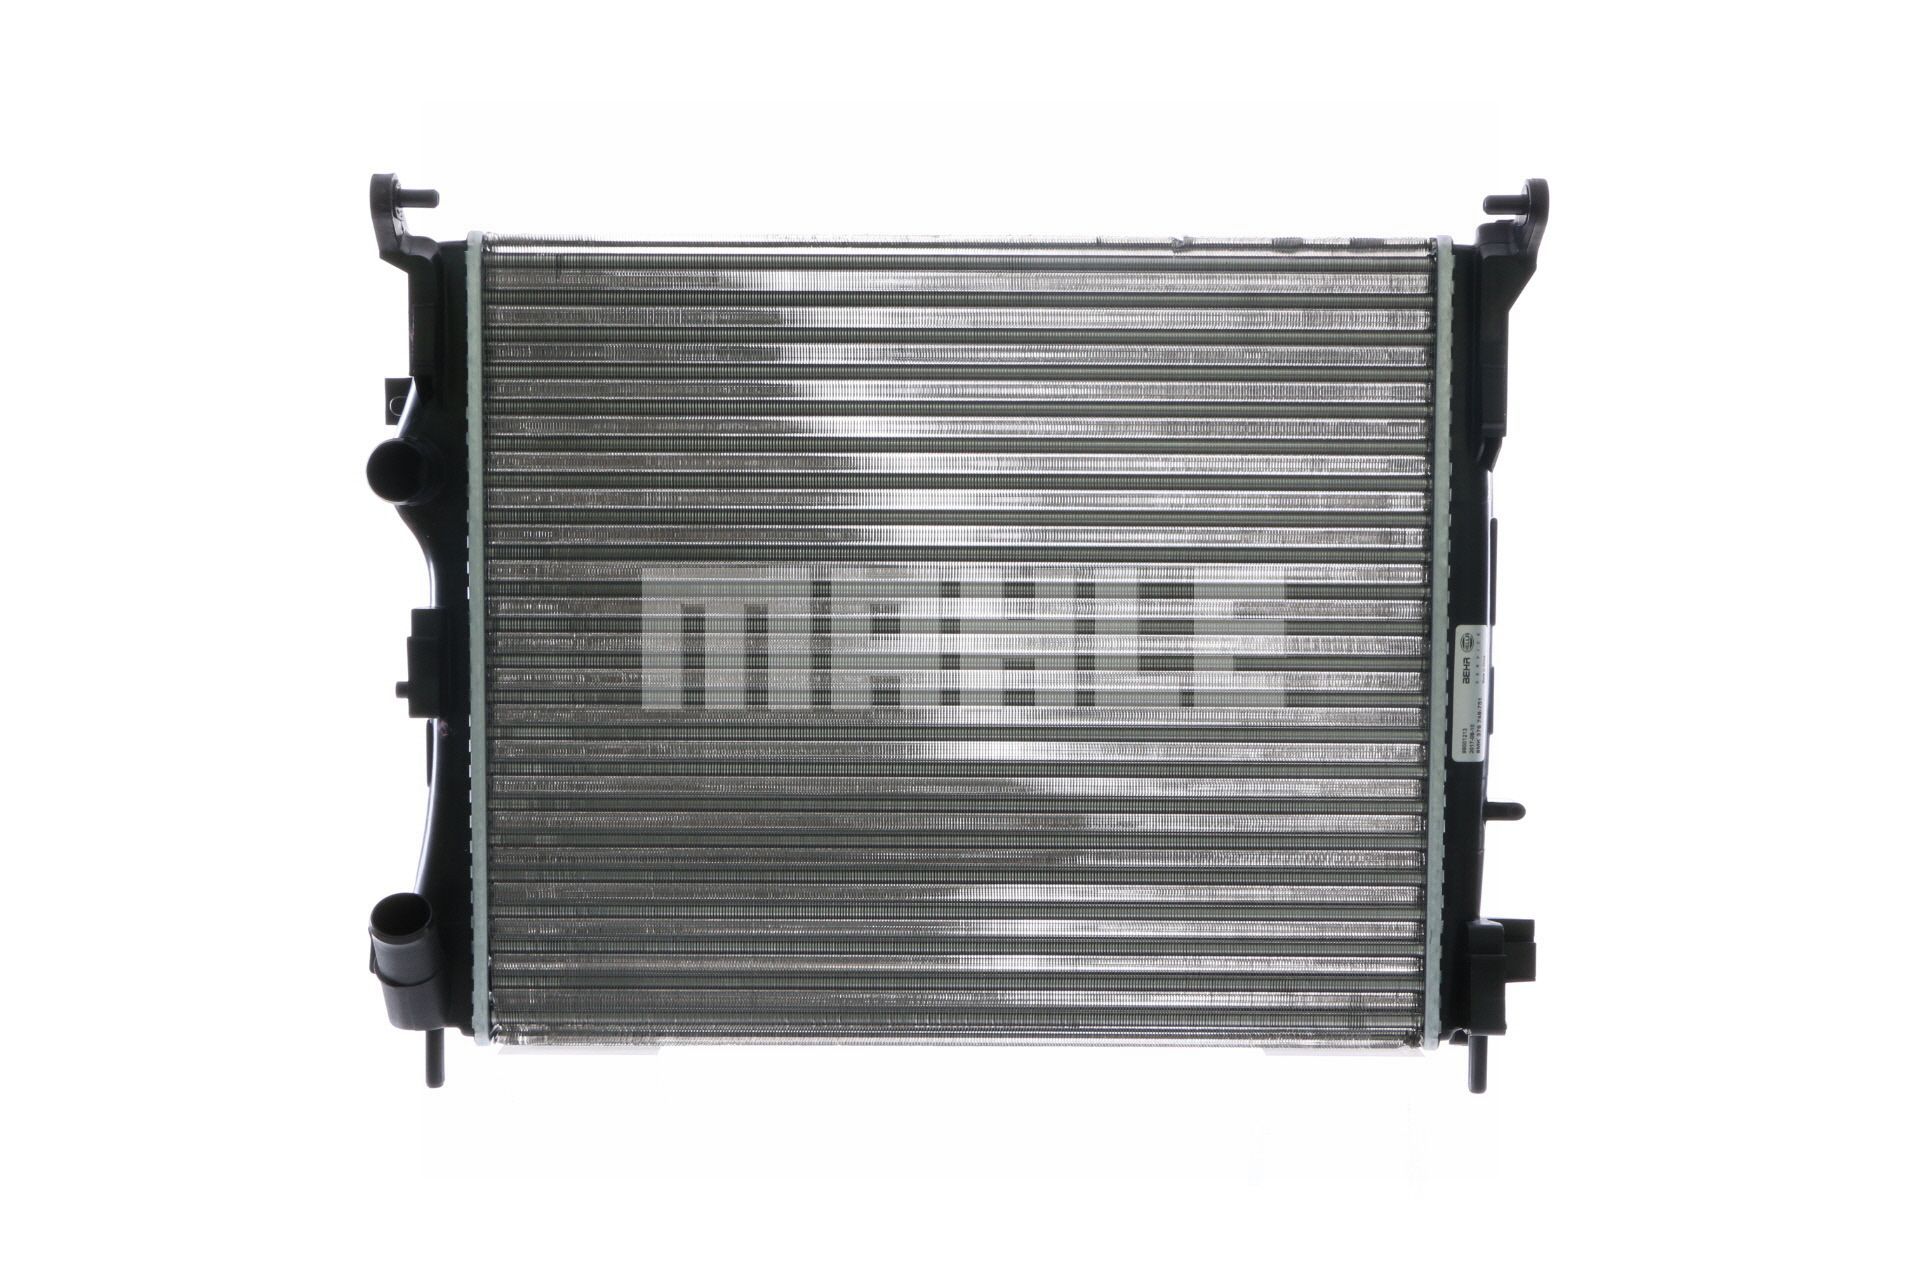 MAHLE ORIGINAL CR 947 000S Engine radiator 480 x 390 x 26 mm, Manual Transmission, Mechanically jointed cooling fins